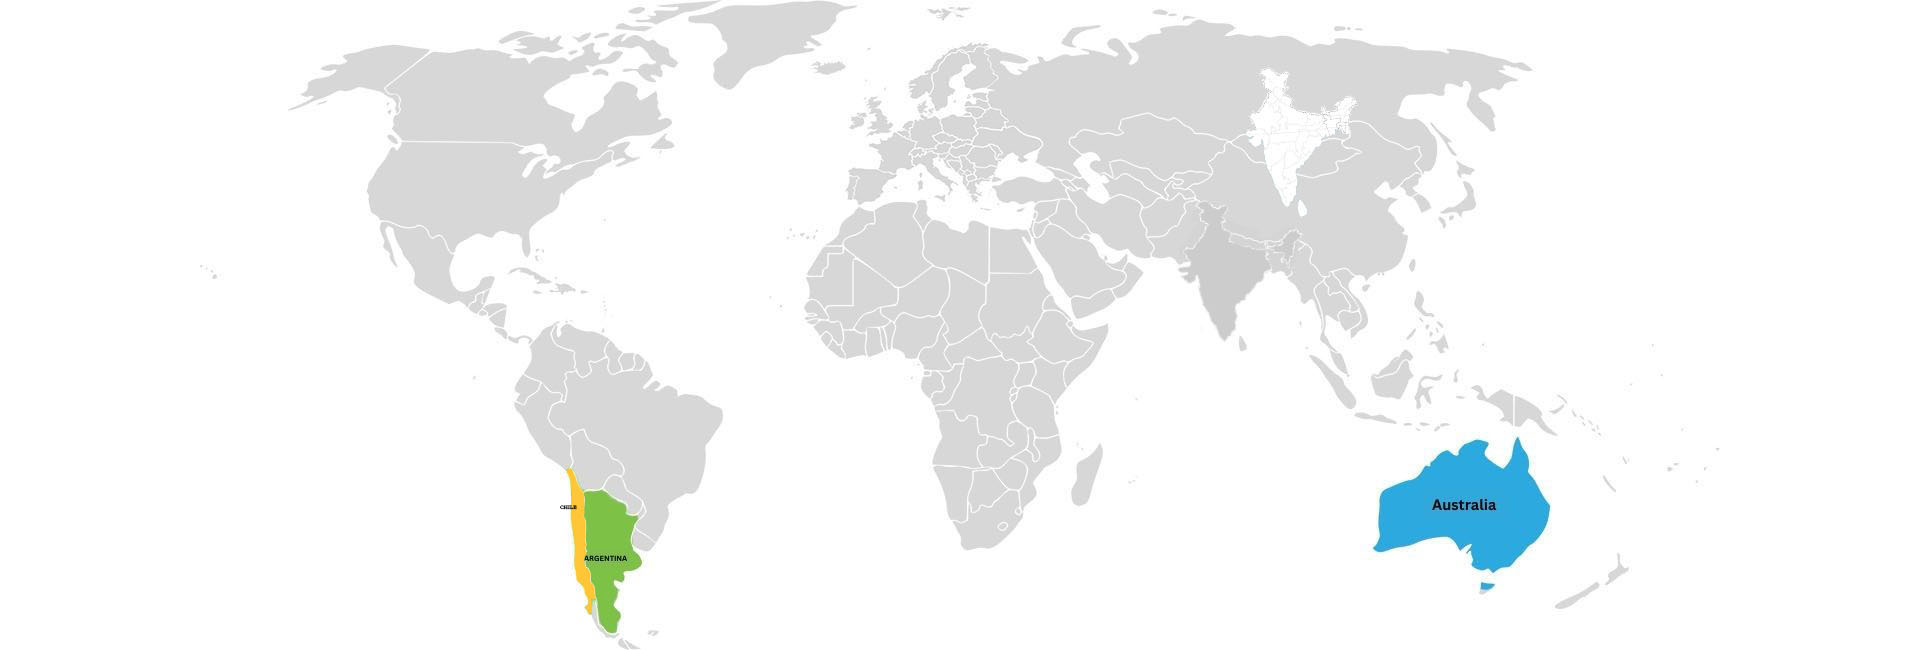 World map highlighting Australia, Argentina, and Chile with KabilIndia footprints